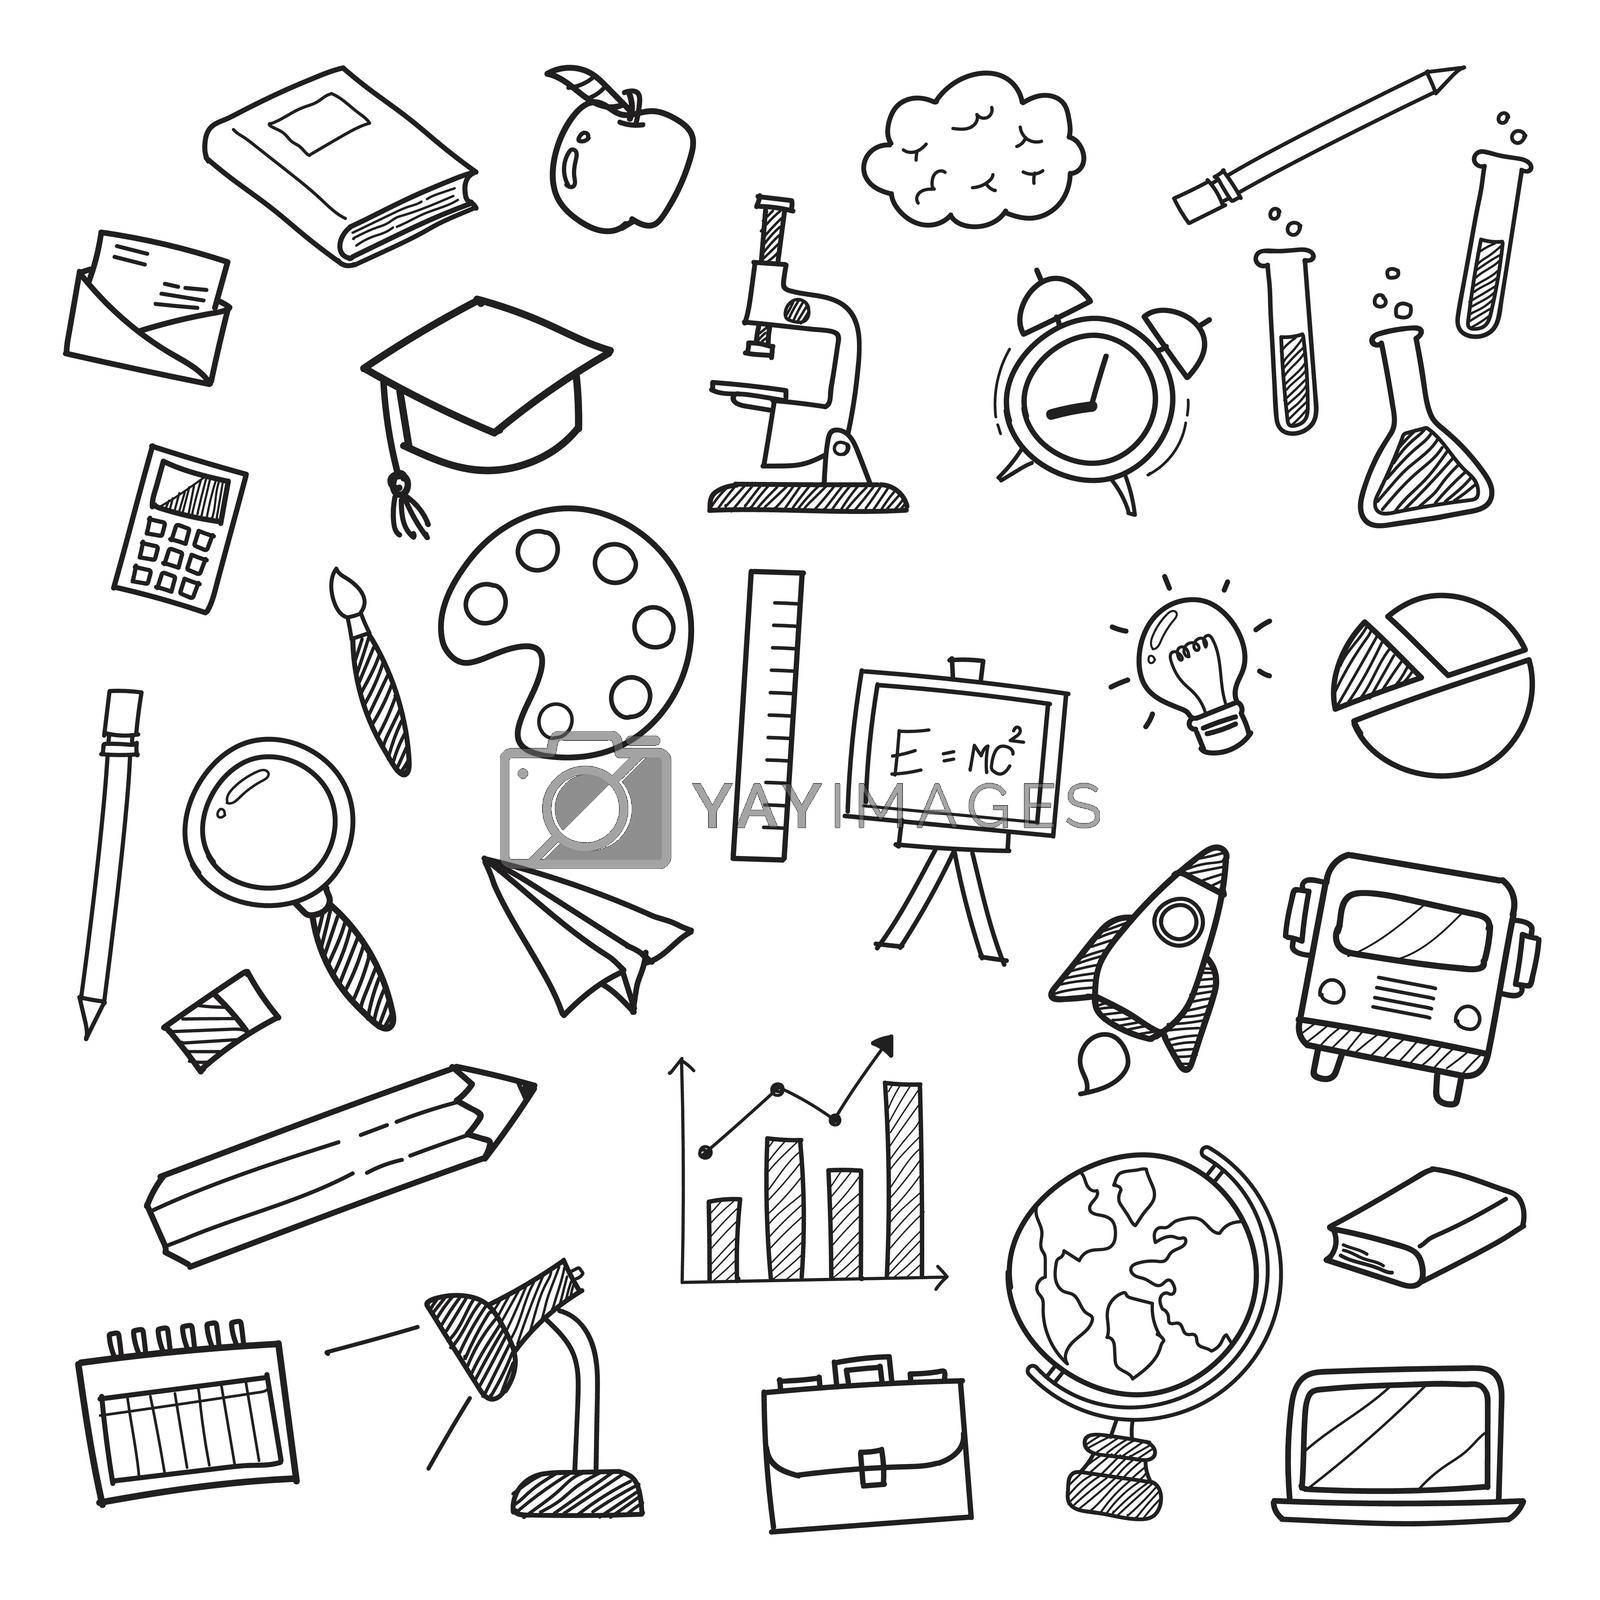 Education icons doodle hand drawn. Vector illustration